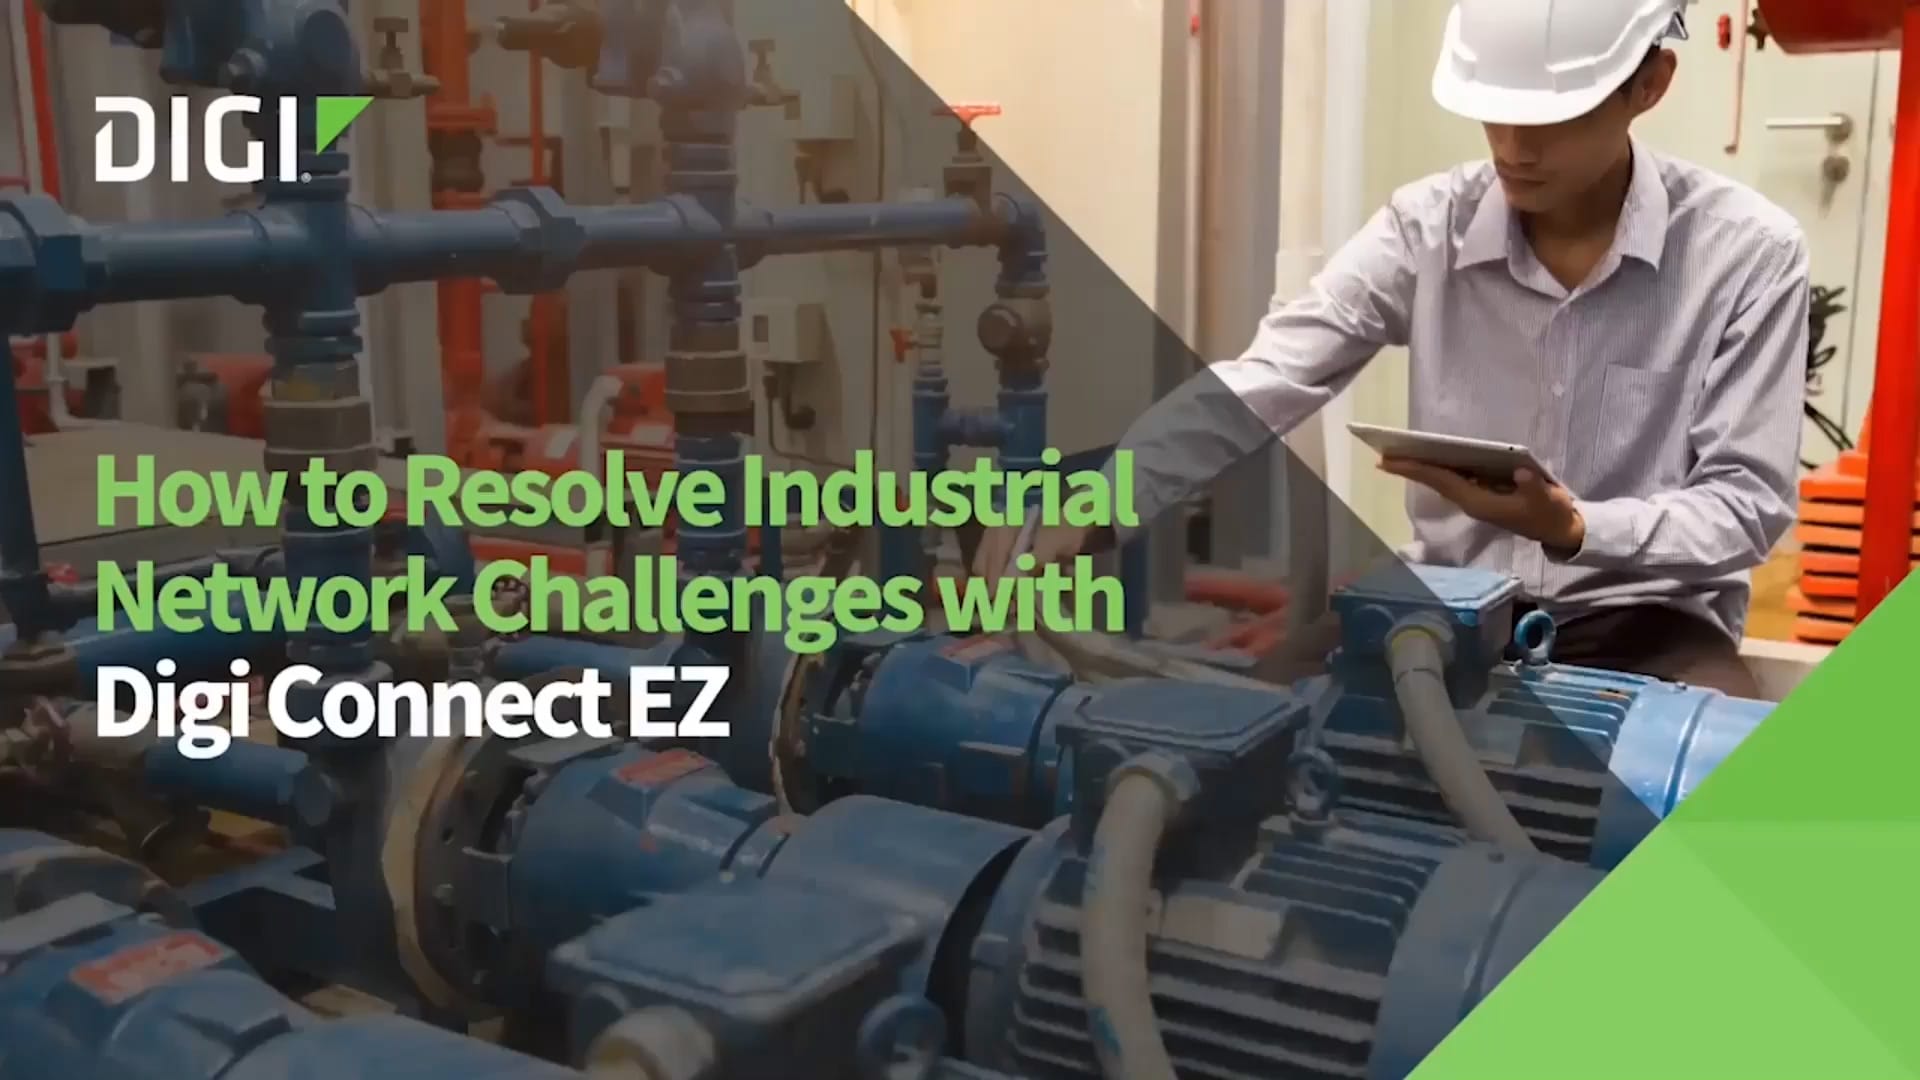 How to Resolve Industrial Network Challenges with Digi Connect EZ